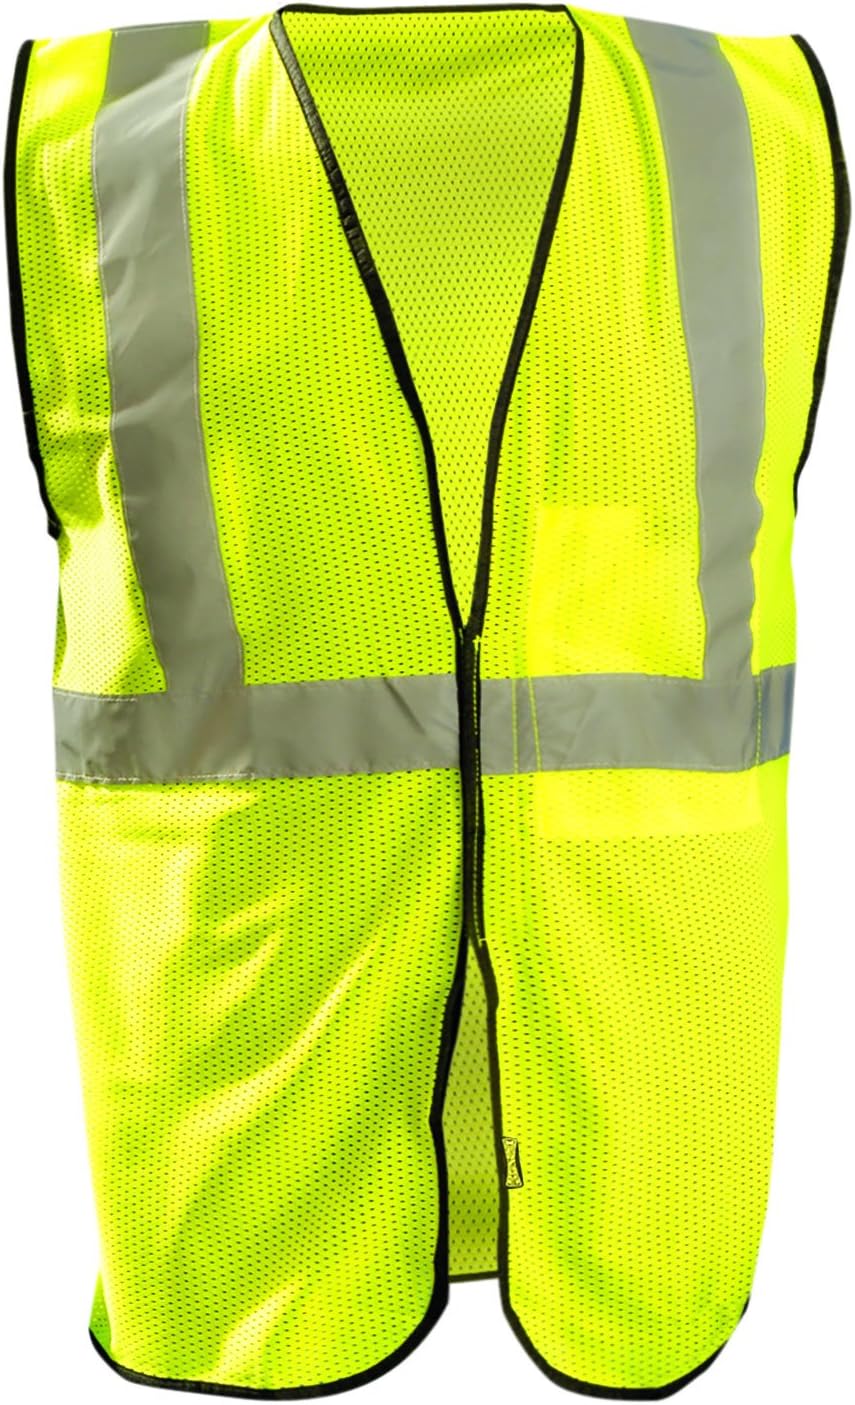 OccuNomix Men's Class 2 Mesh Hook & Loop Safety Vest (Yellow, 2XL/3XL) $0.85 + Free Shipping w/ Prime or $35+